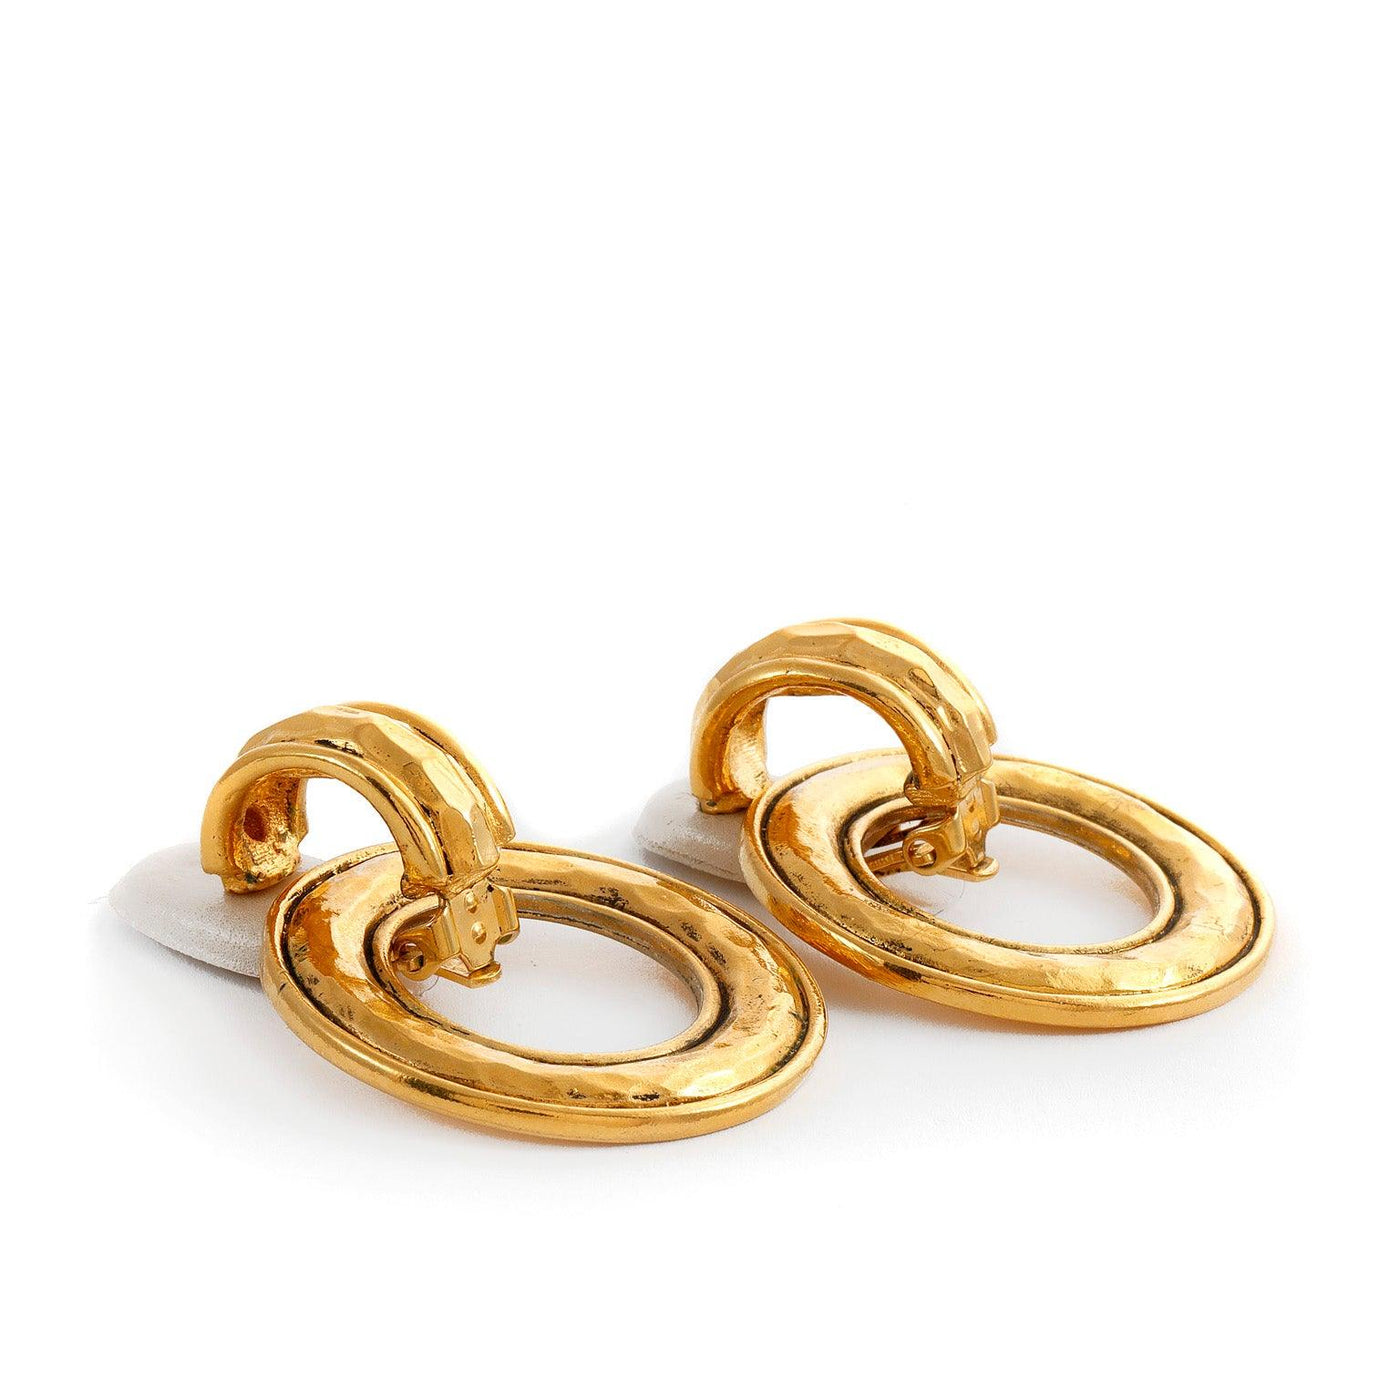 Chanel Gold Hammered Hoop Earrings - Only Authentics